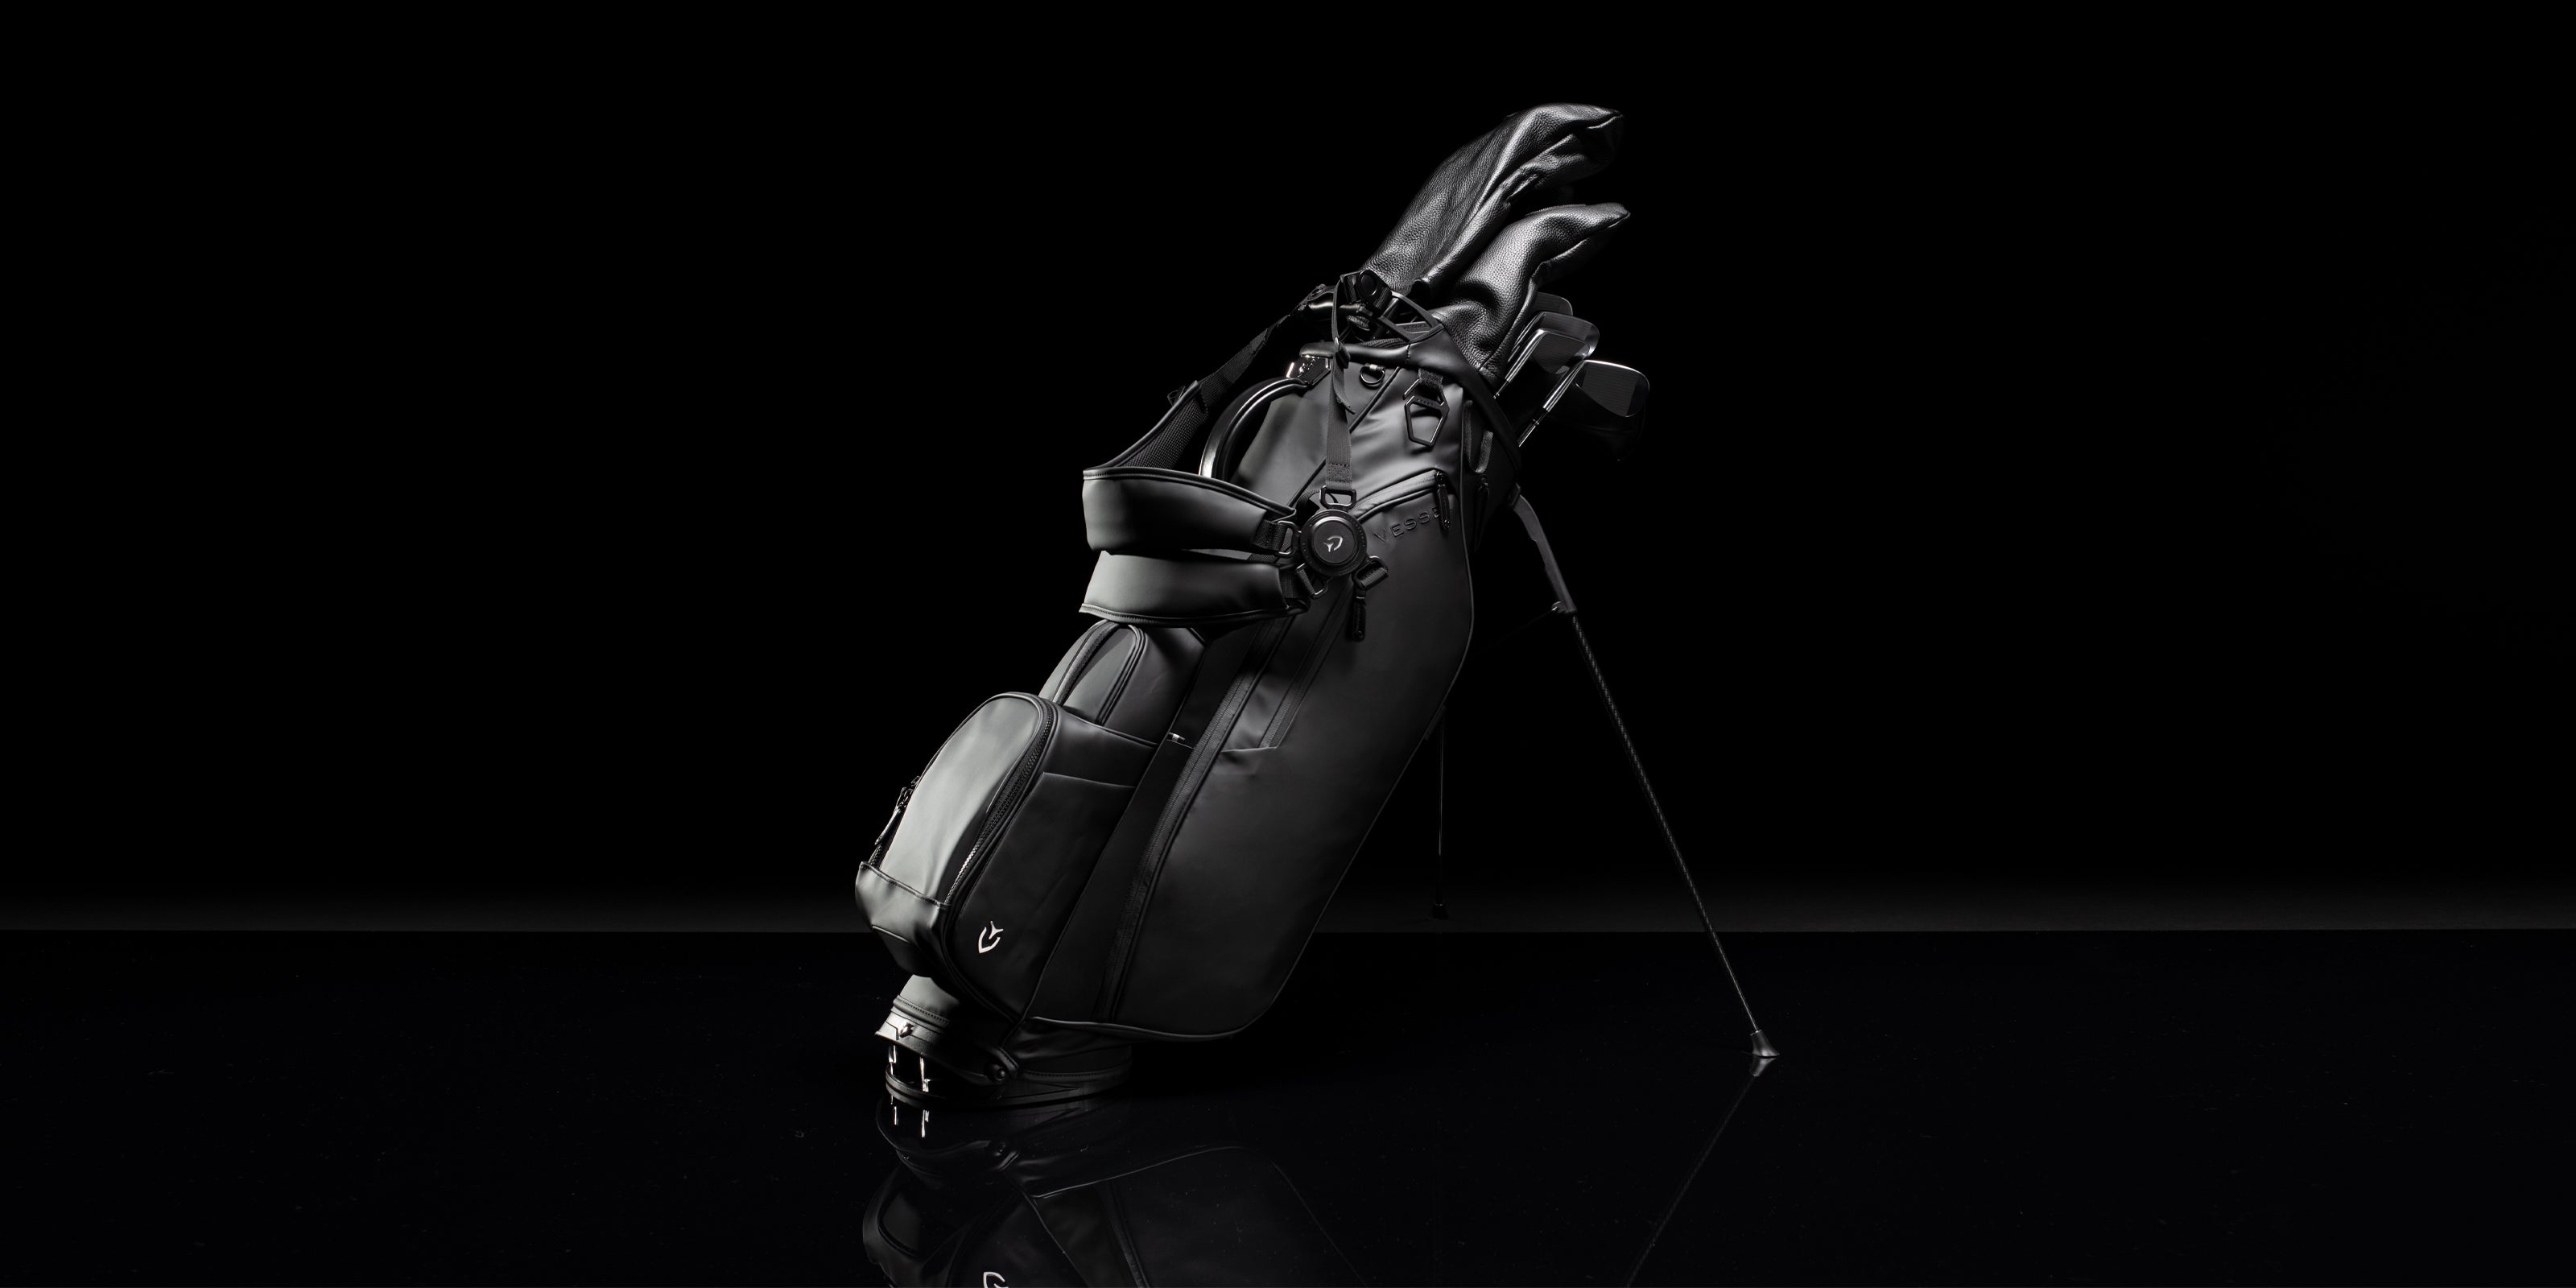 Vessel Player IV Pro: The Stand Bag, Reimagined – WiscoGolfAddict